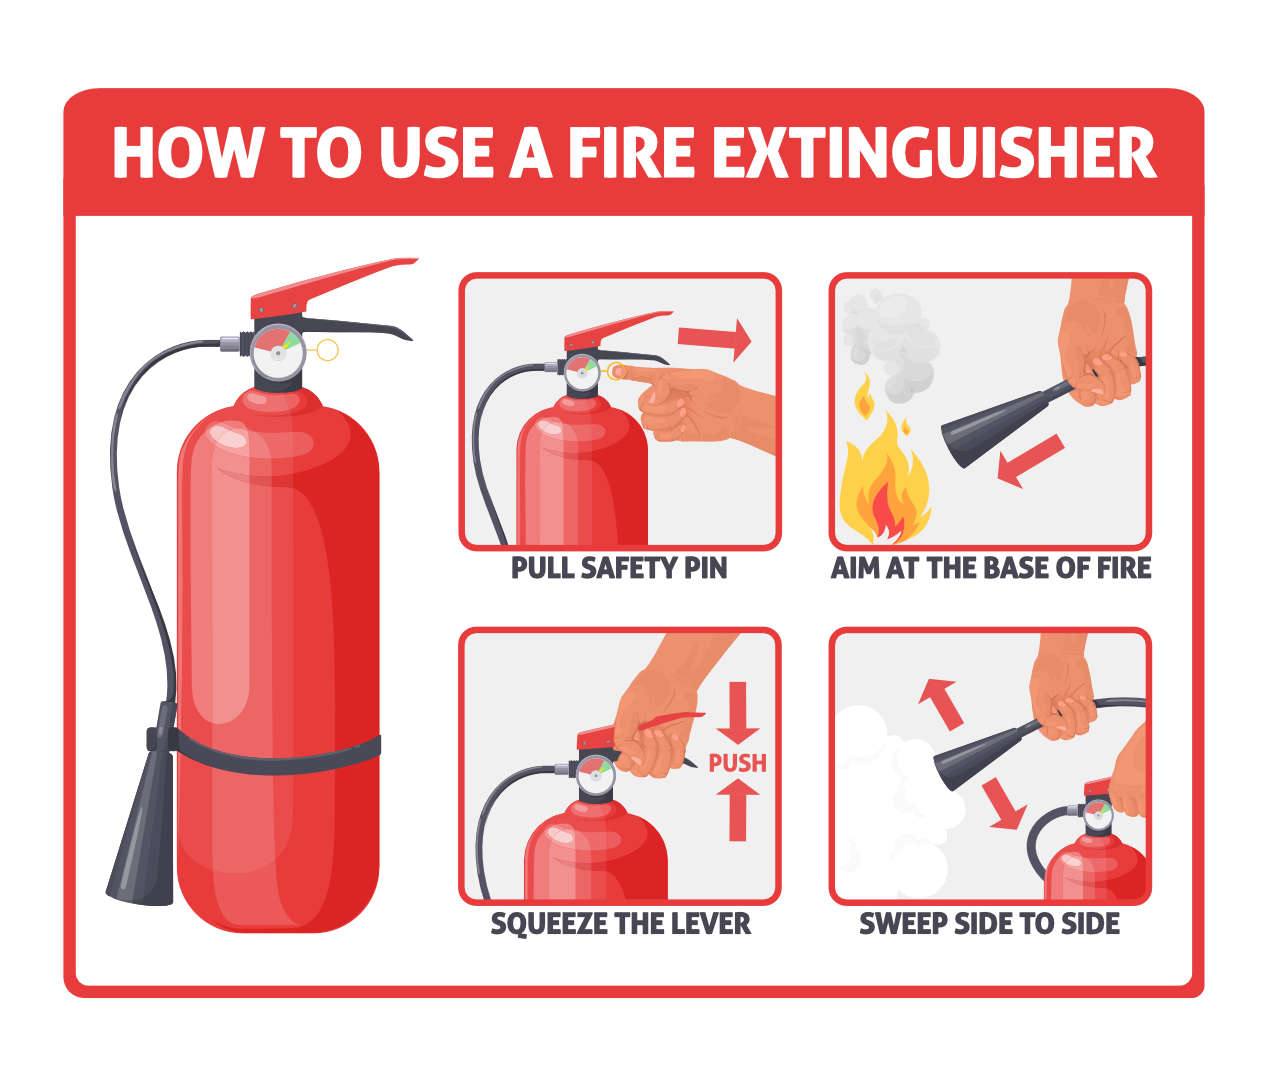 PASS fire extinguisher infographic showing how to use a fire extinguisher